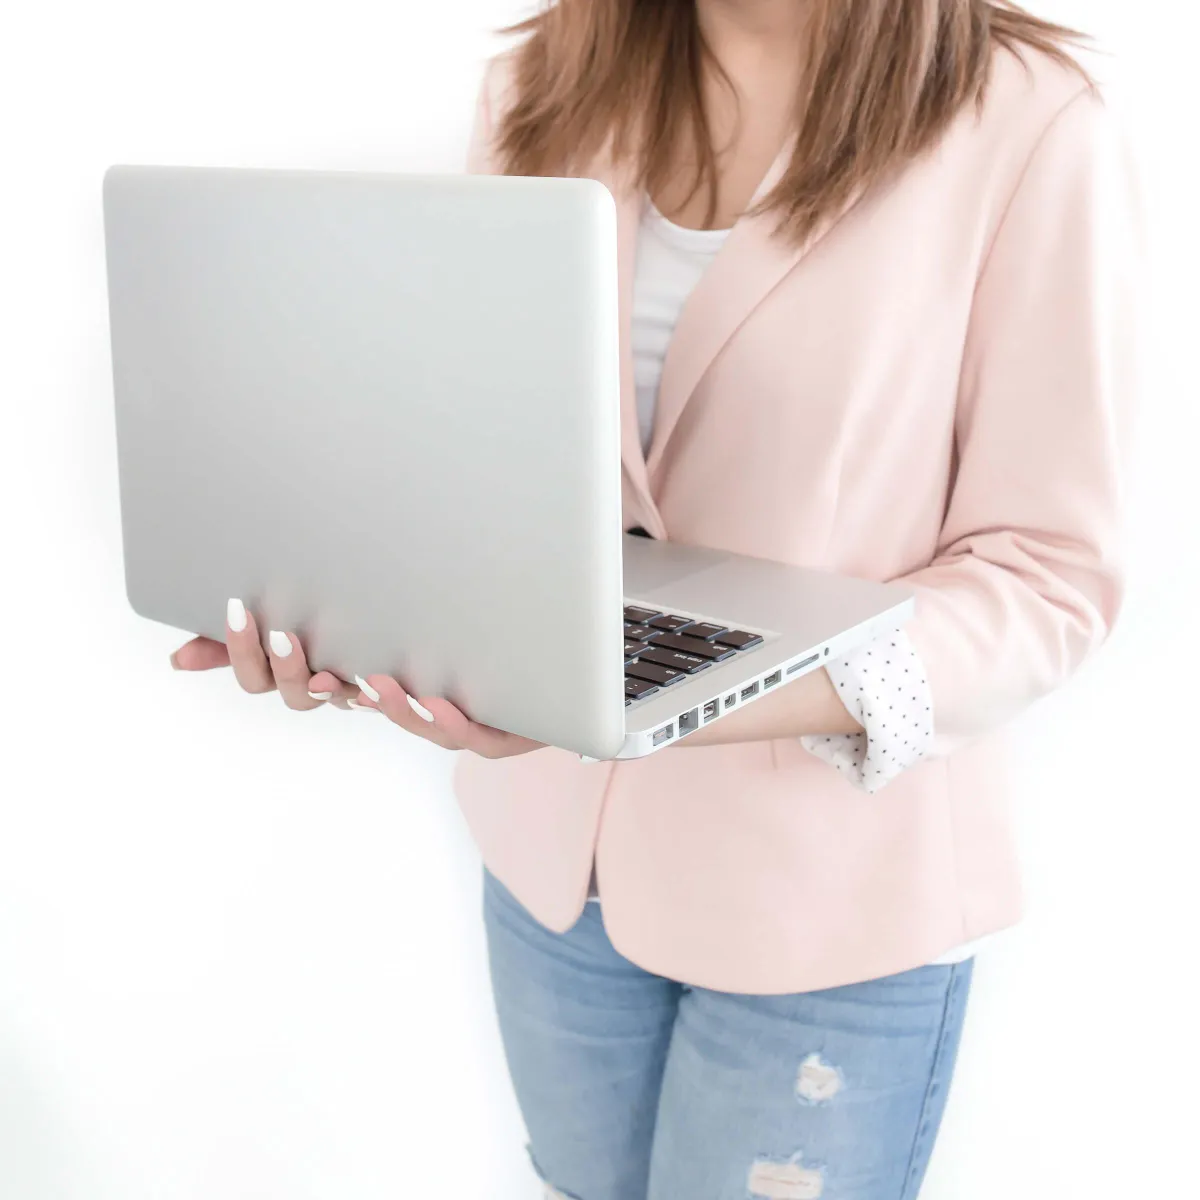 Woman holding a computer building a website